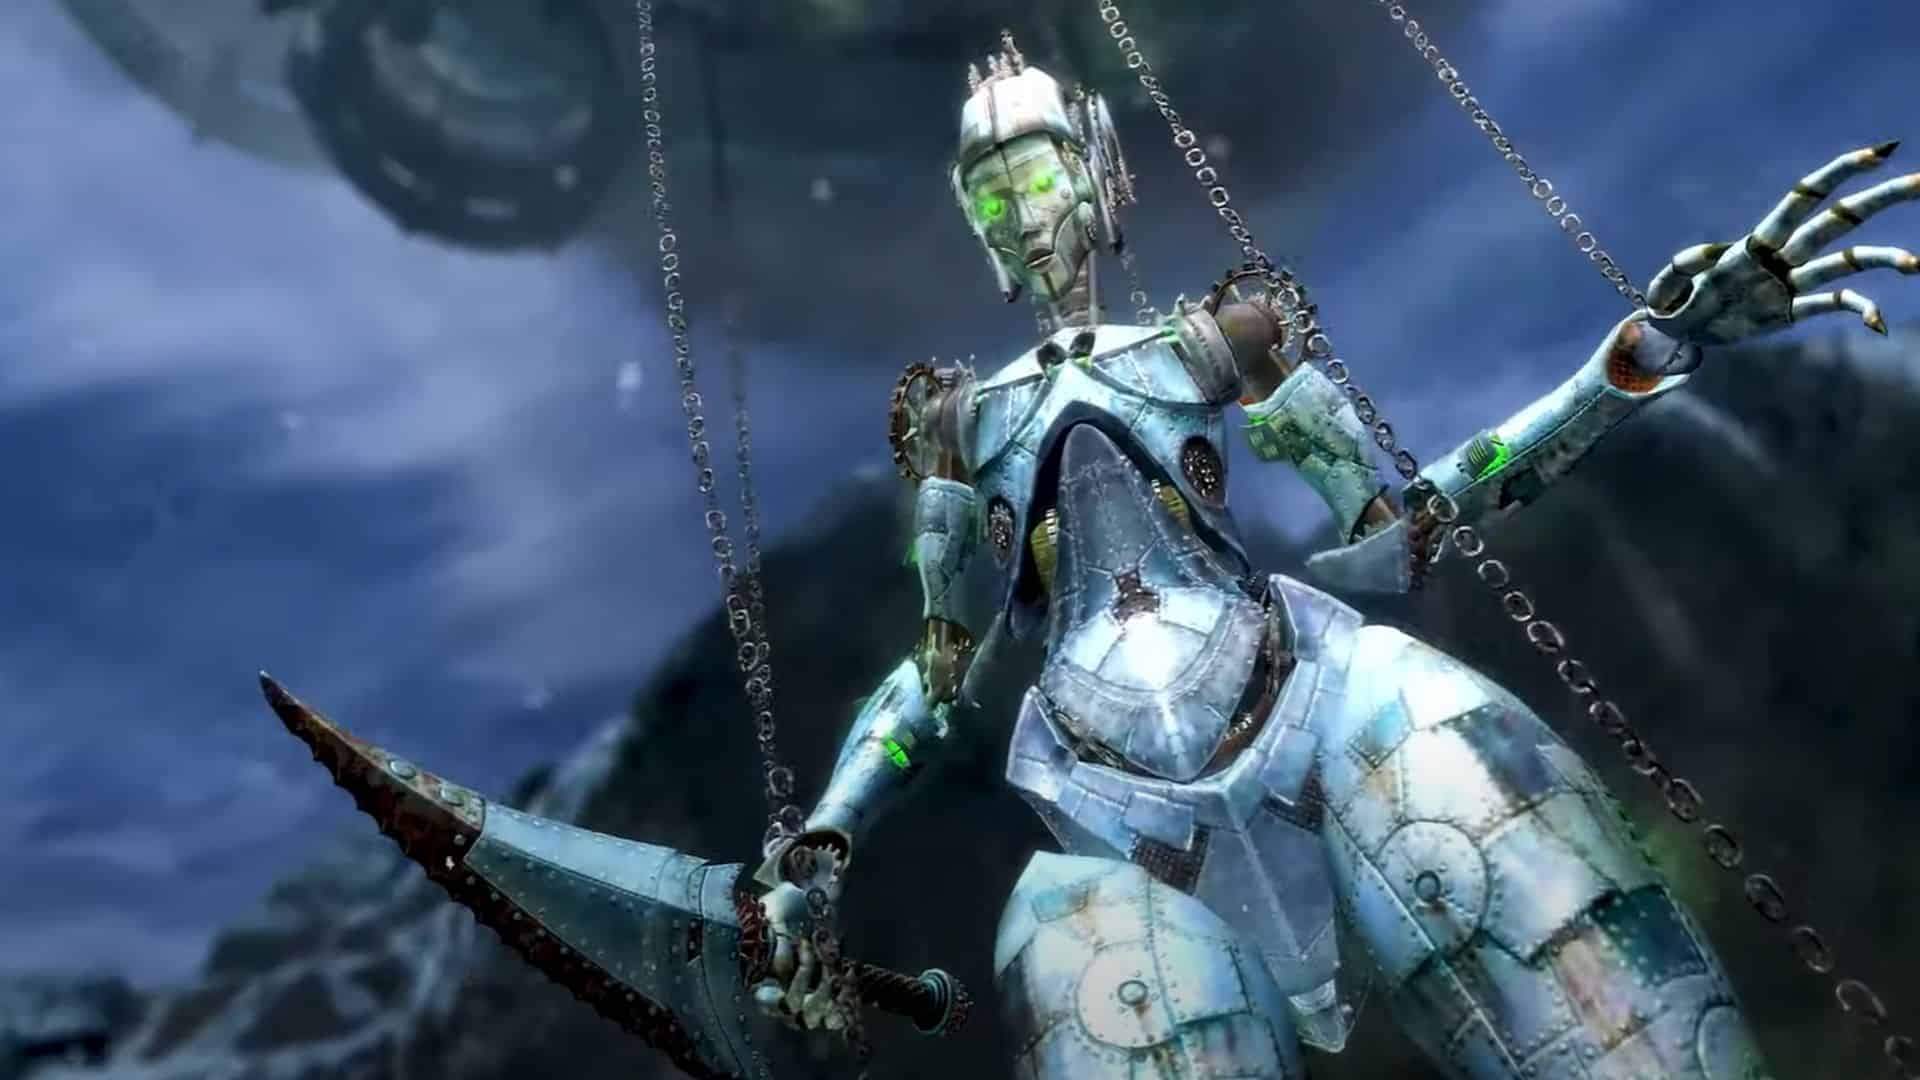 guild wars 2 twisted marionette boss